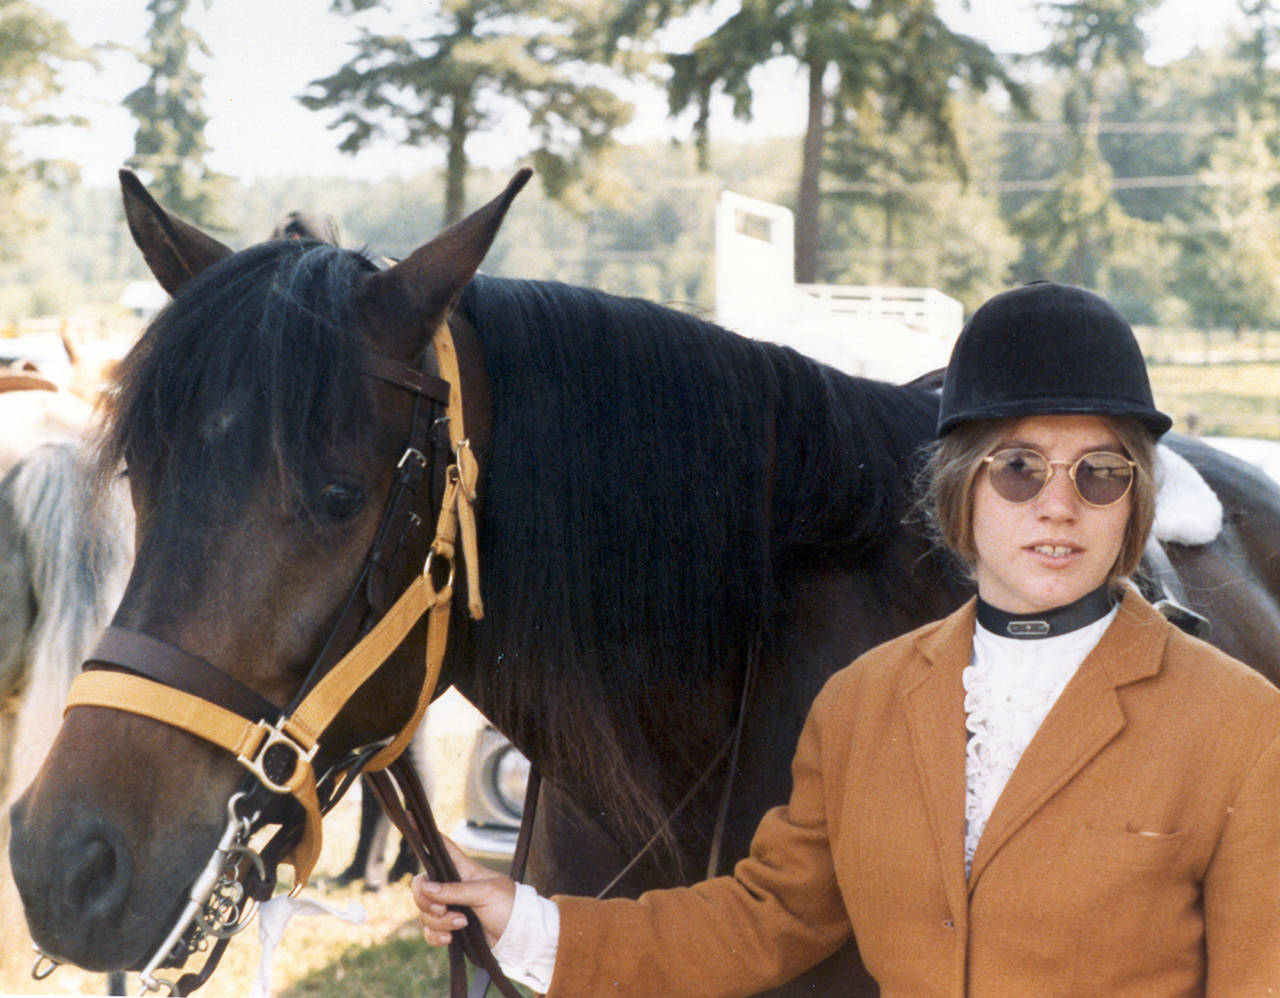 Jody Loomis is pictured with her horse in 1972. Photo courtesy of Snohomish County Sheriff’s Office